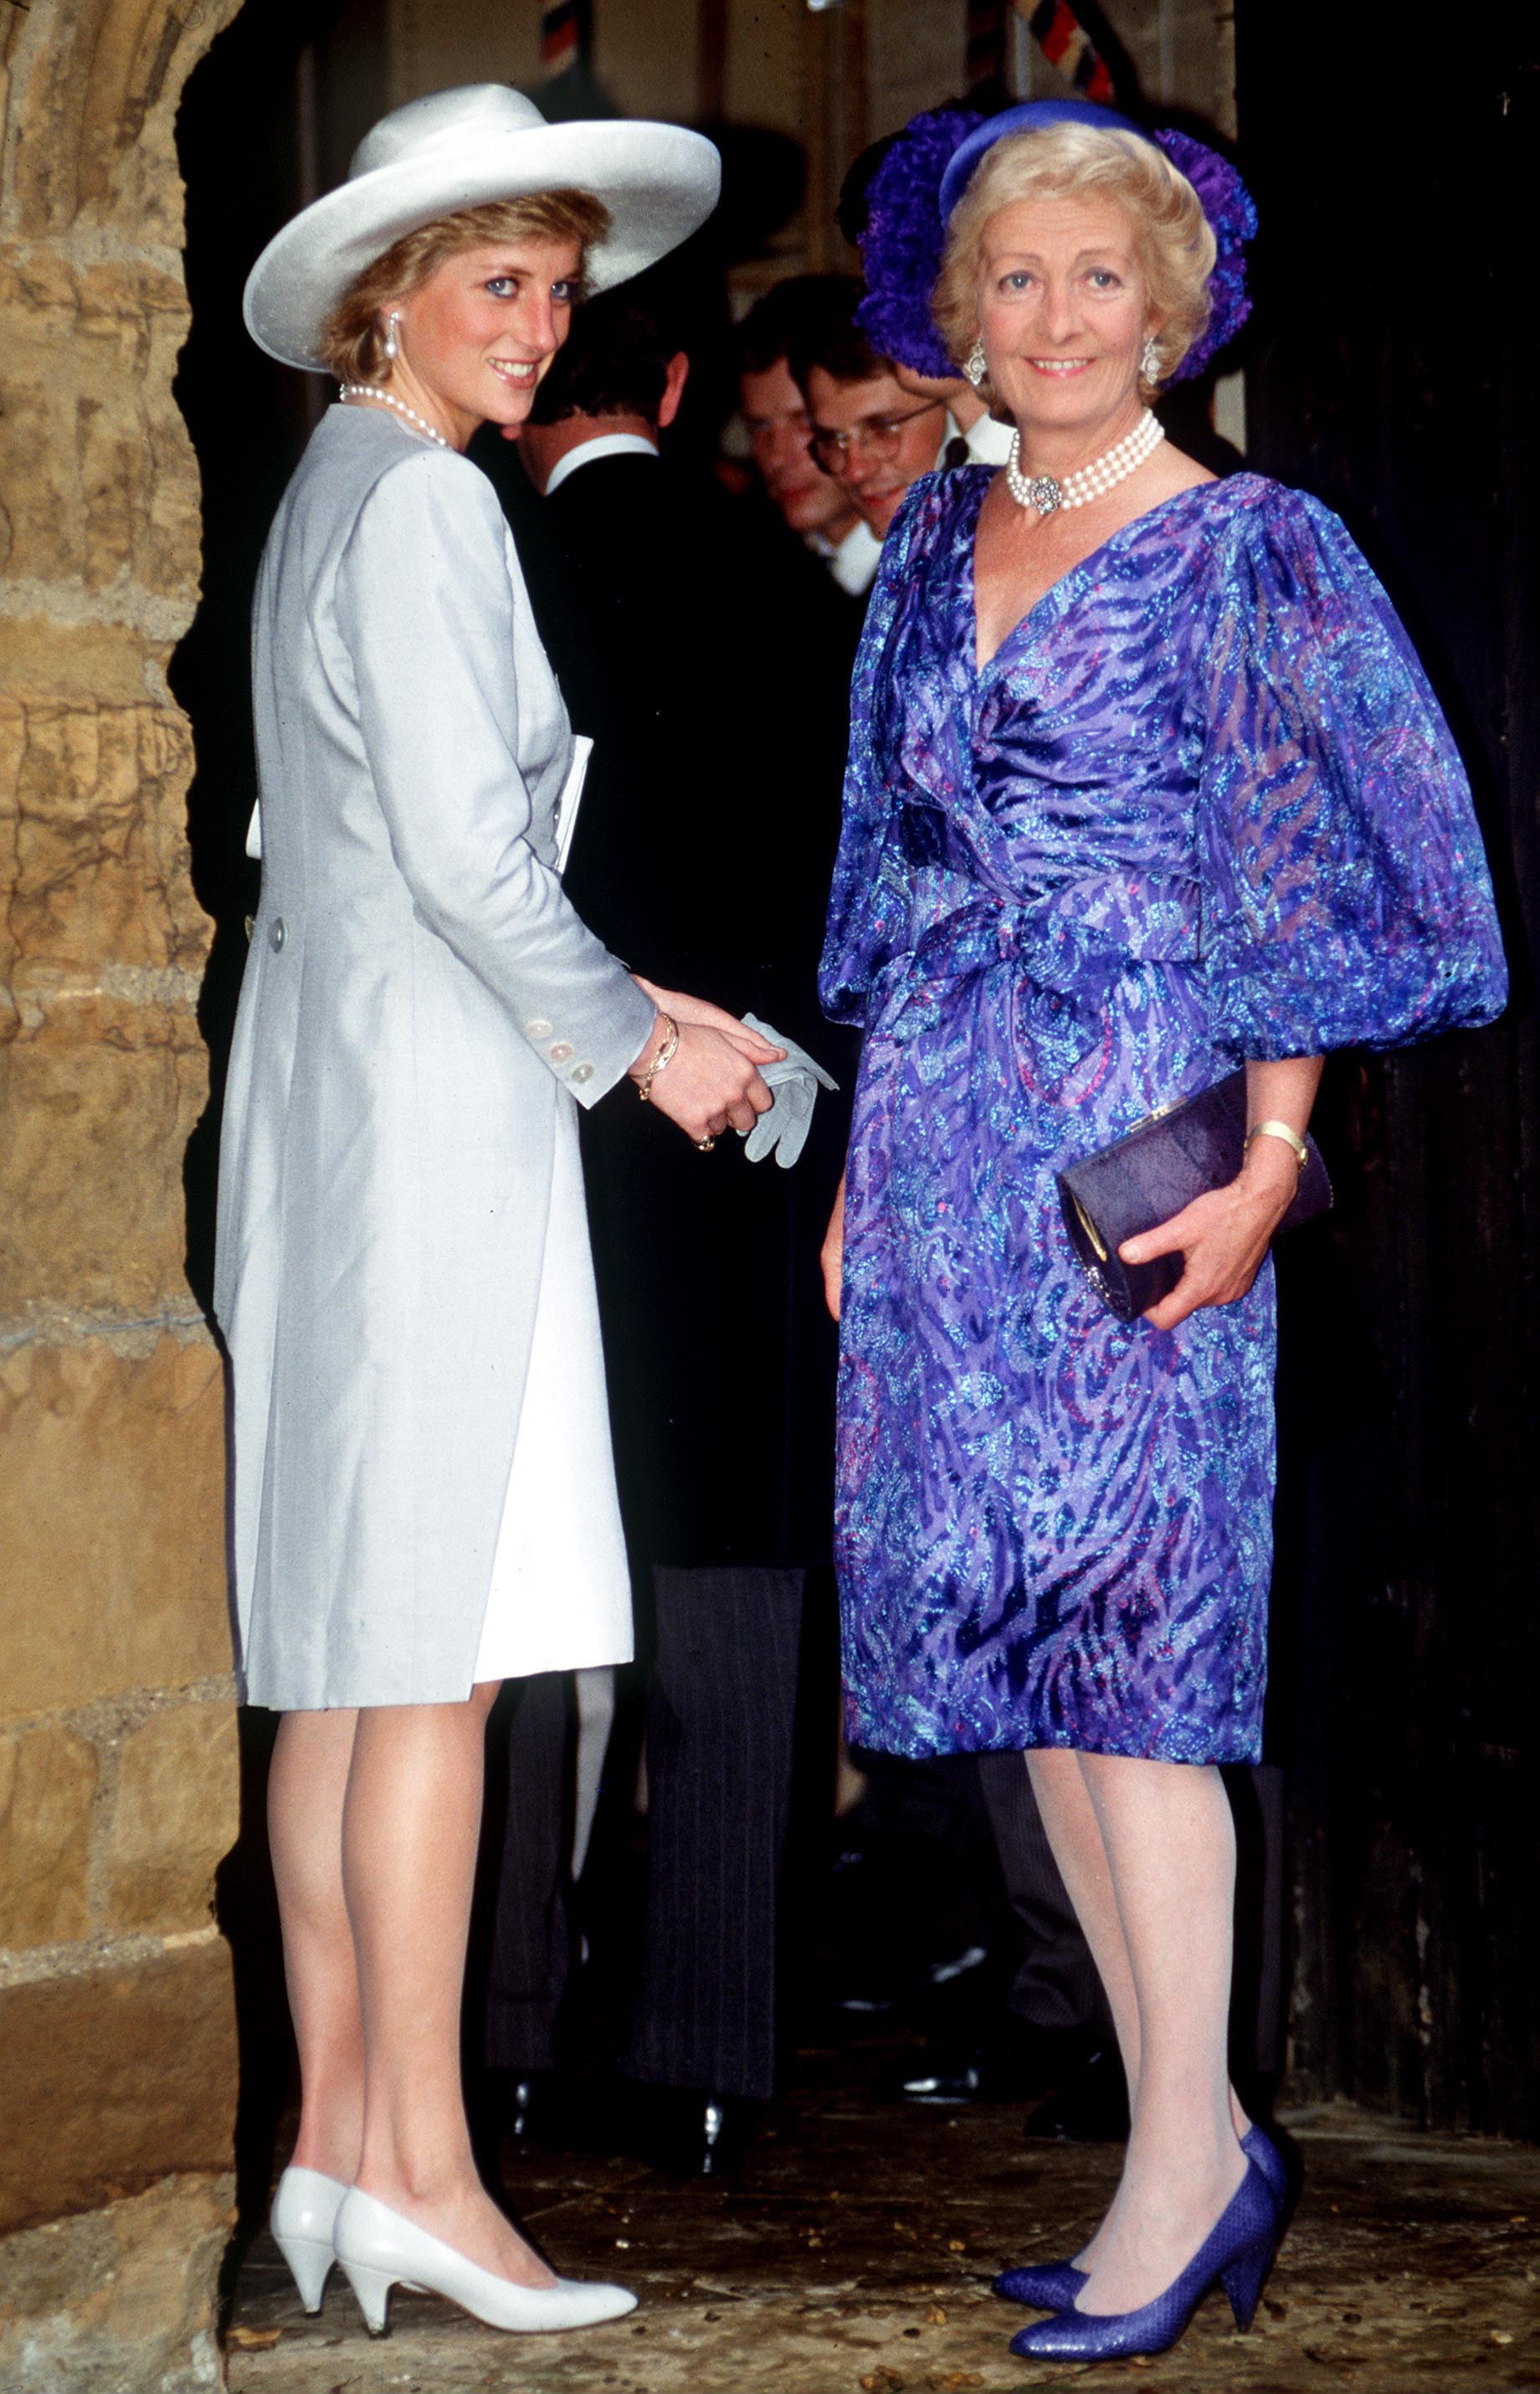 Princess Diana and Frances Shand Kydd at Viscount and Viscountess Althorp's wedding in Great Brington, England on September 16, 1989 | Source: Getty Images